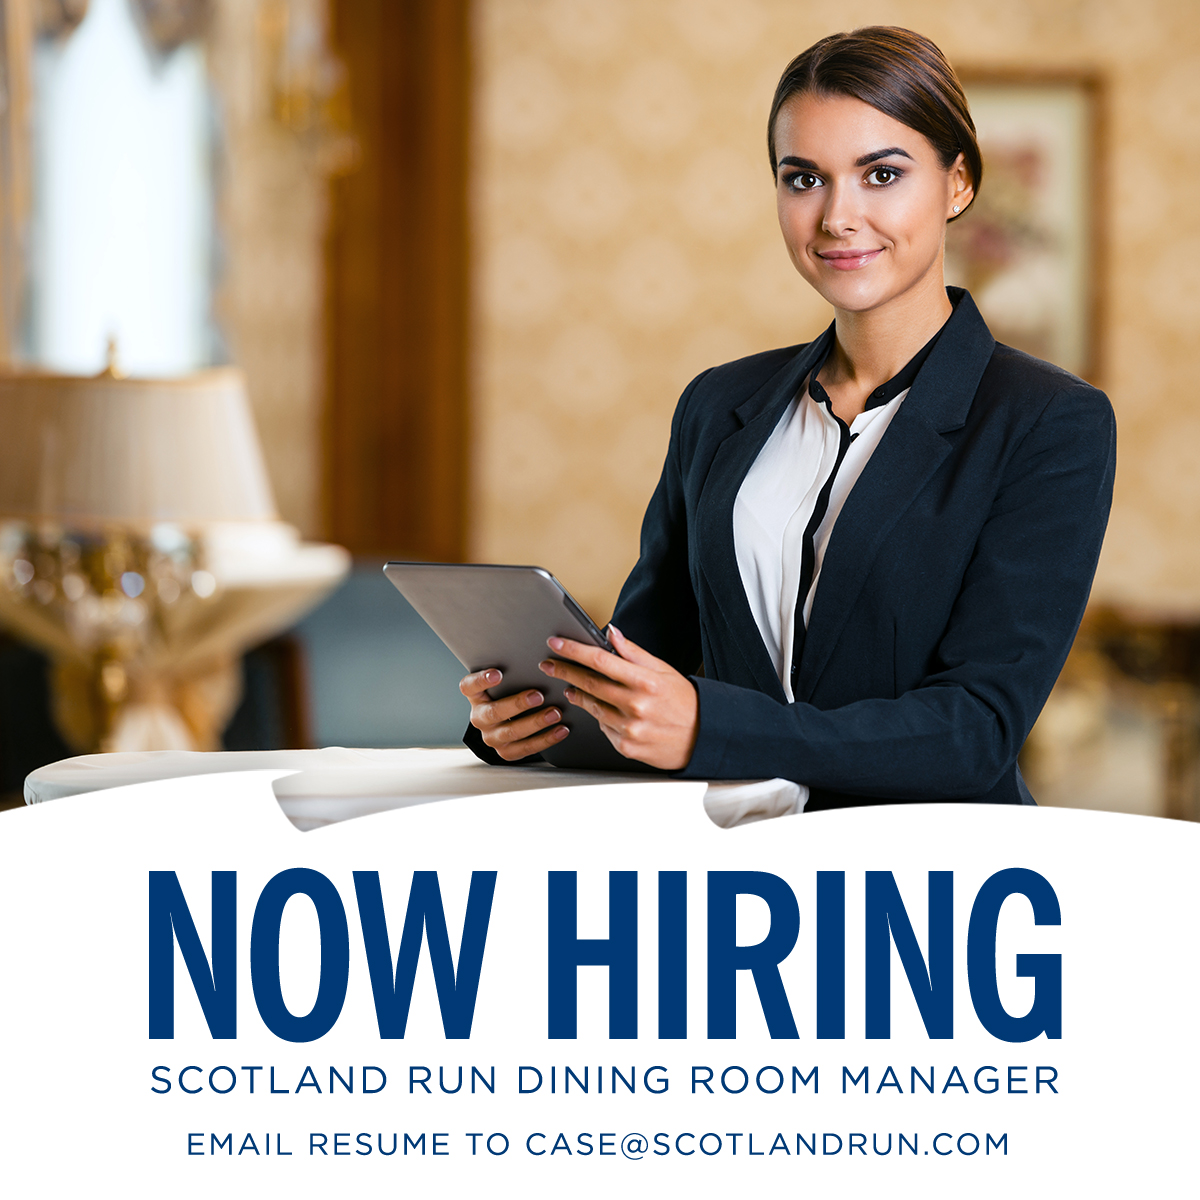 We are looking for a new Dining Room Manager to join our team at Scotland Run. Three years of dining room supervisory experience required and four-year degree in Hospitality preferred. Please email your resume to case@scotlandrun.com to apply today.